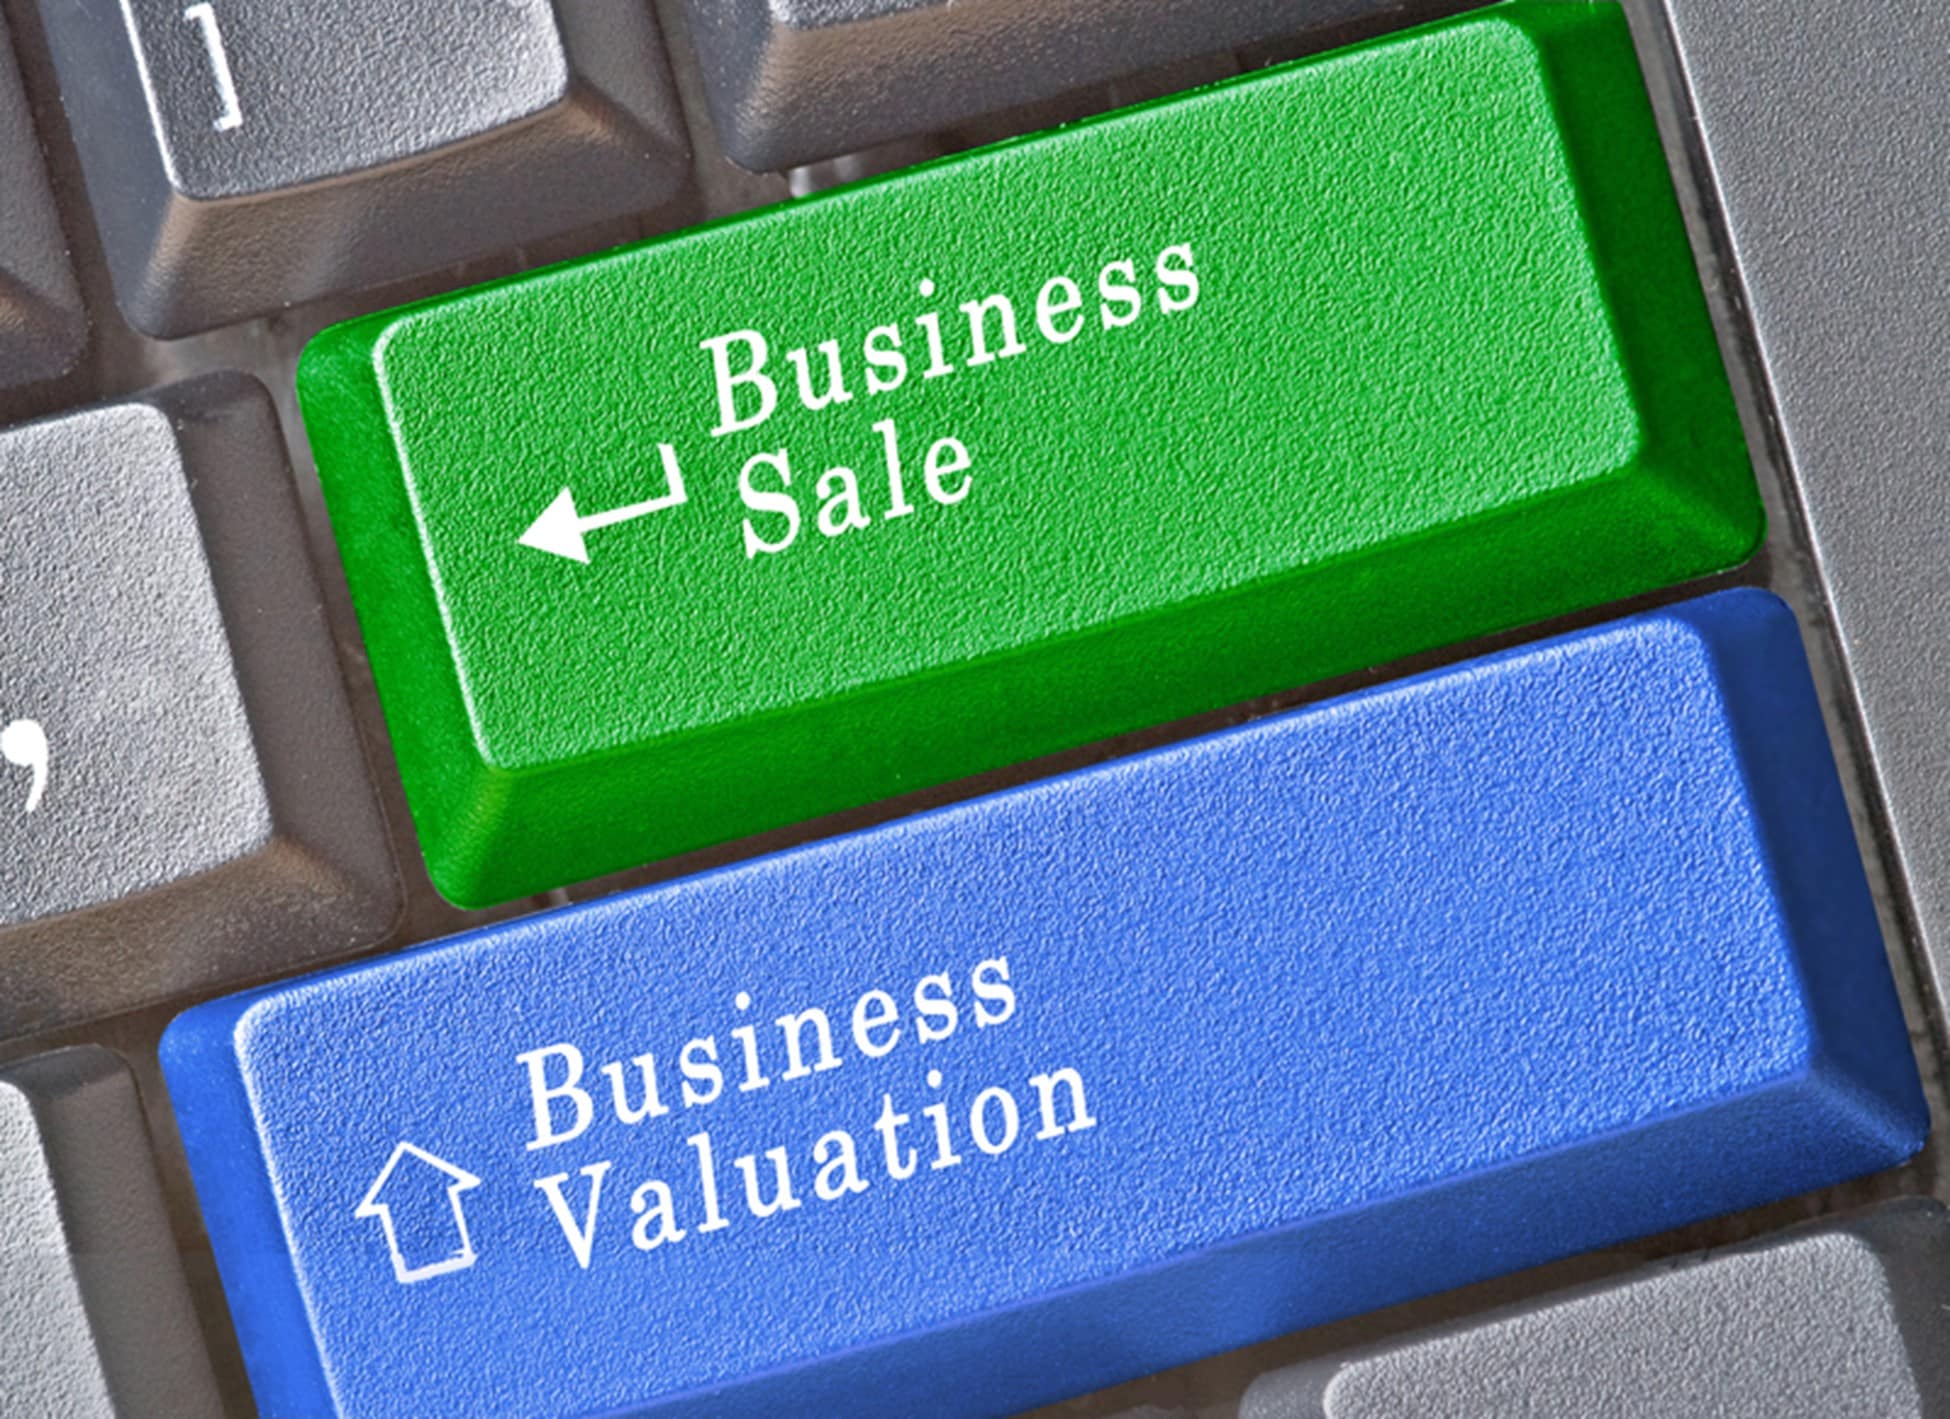 How to Value a Business